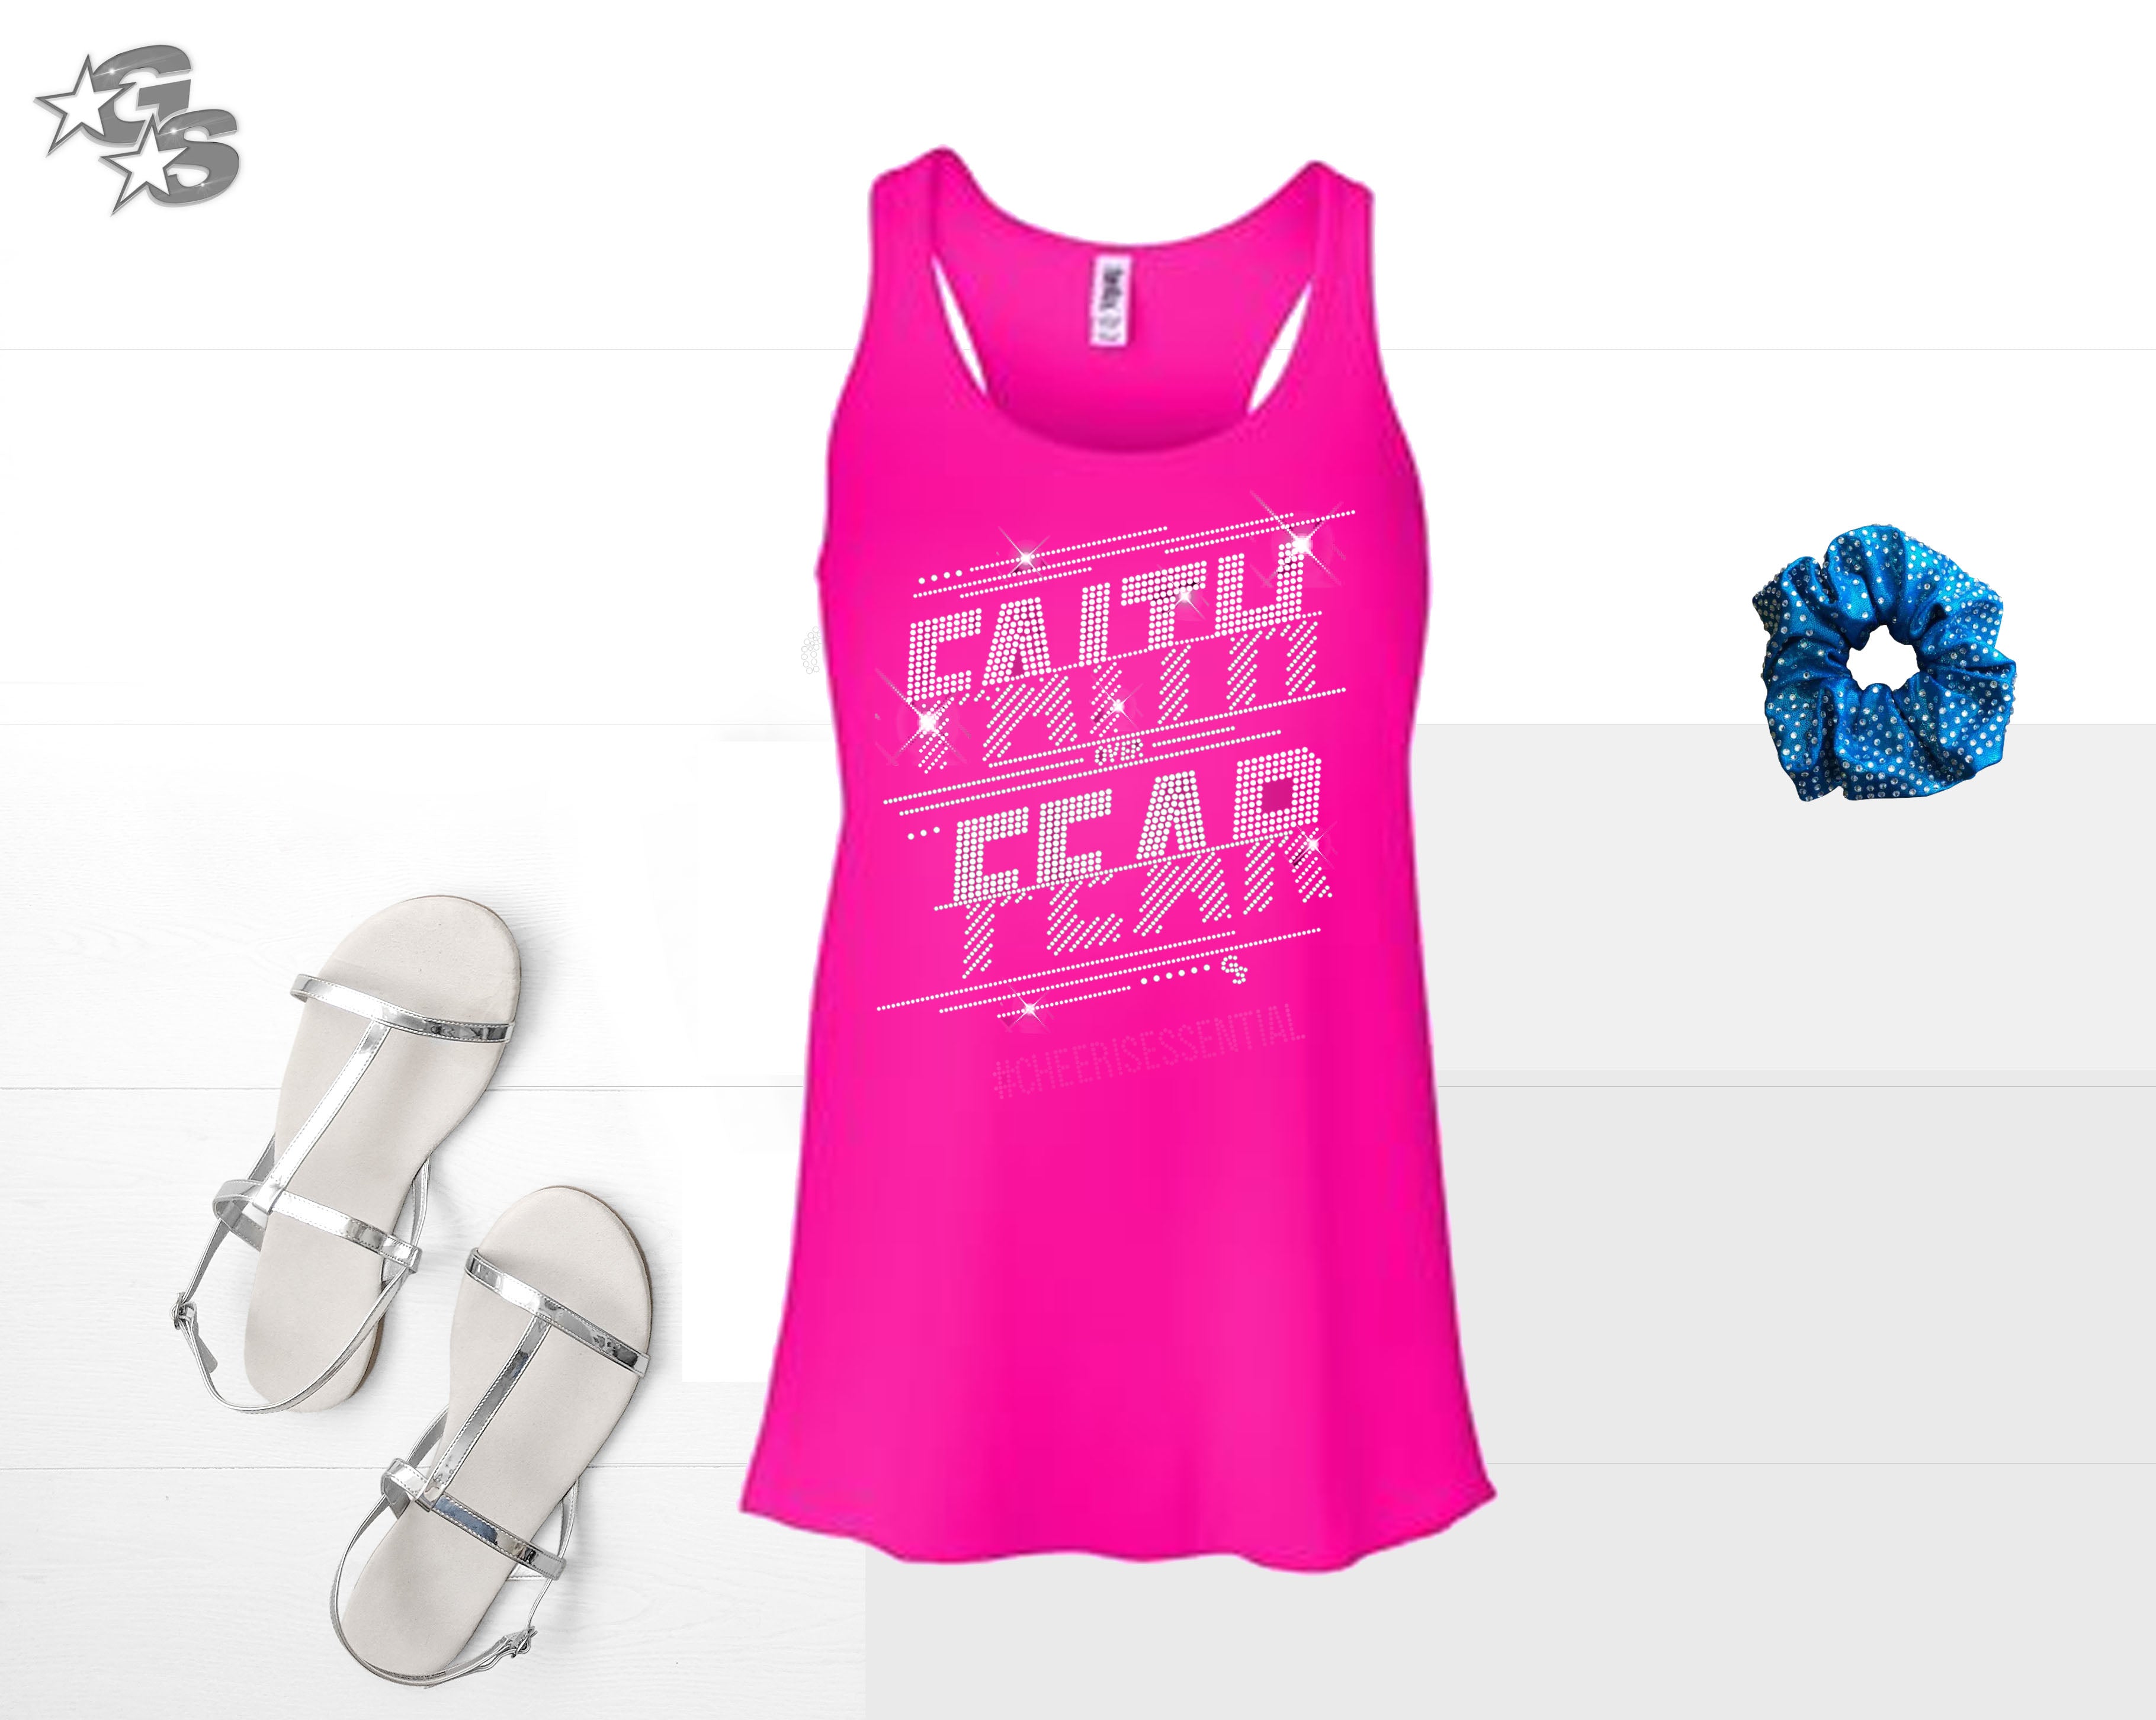 Faith over Fear - Must Have Tank - Pink (Bling Logo) - no hashtag or AMKM hashtag